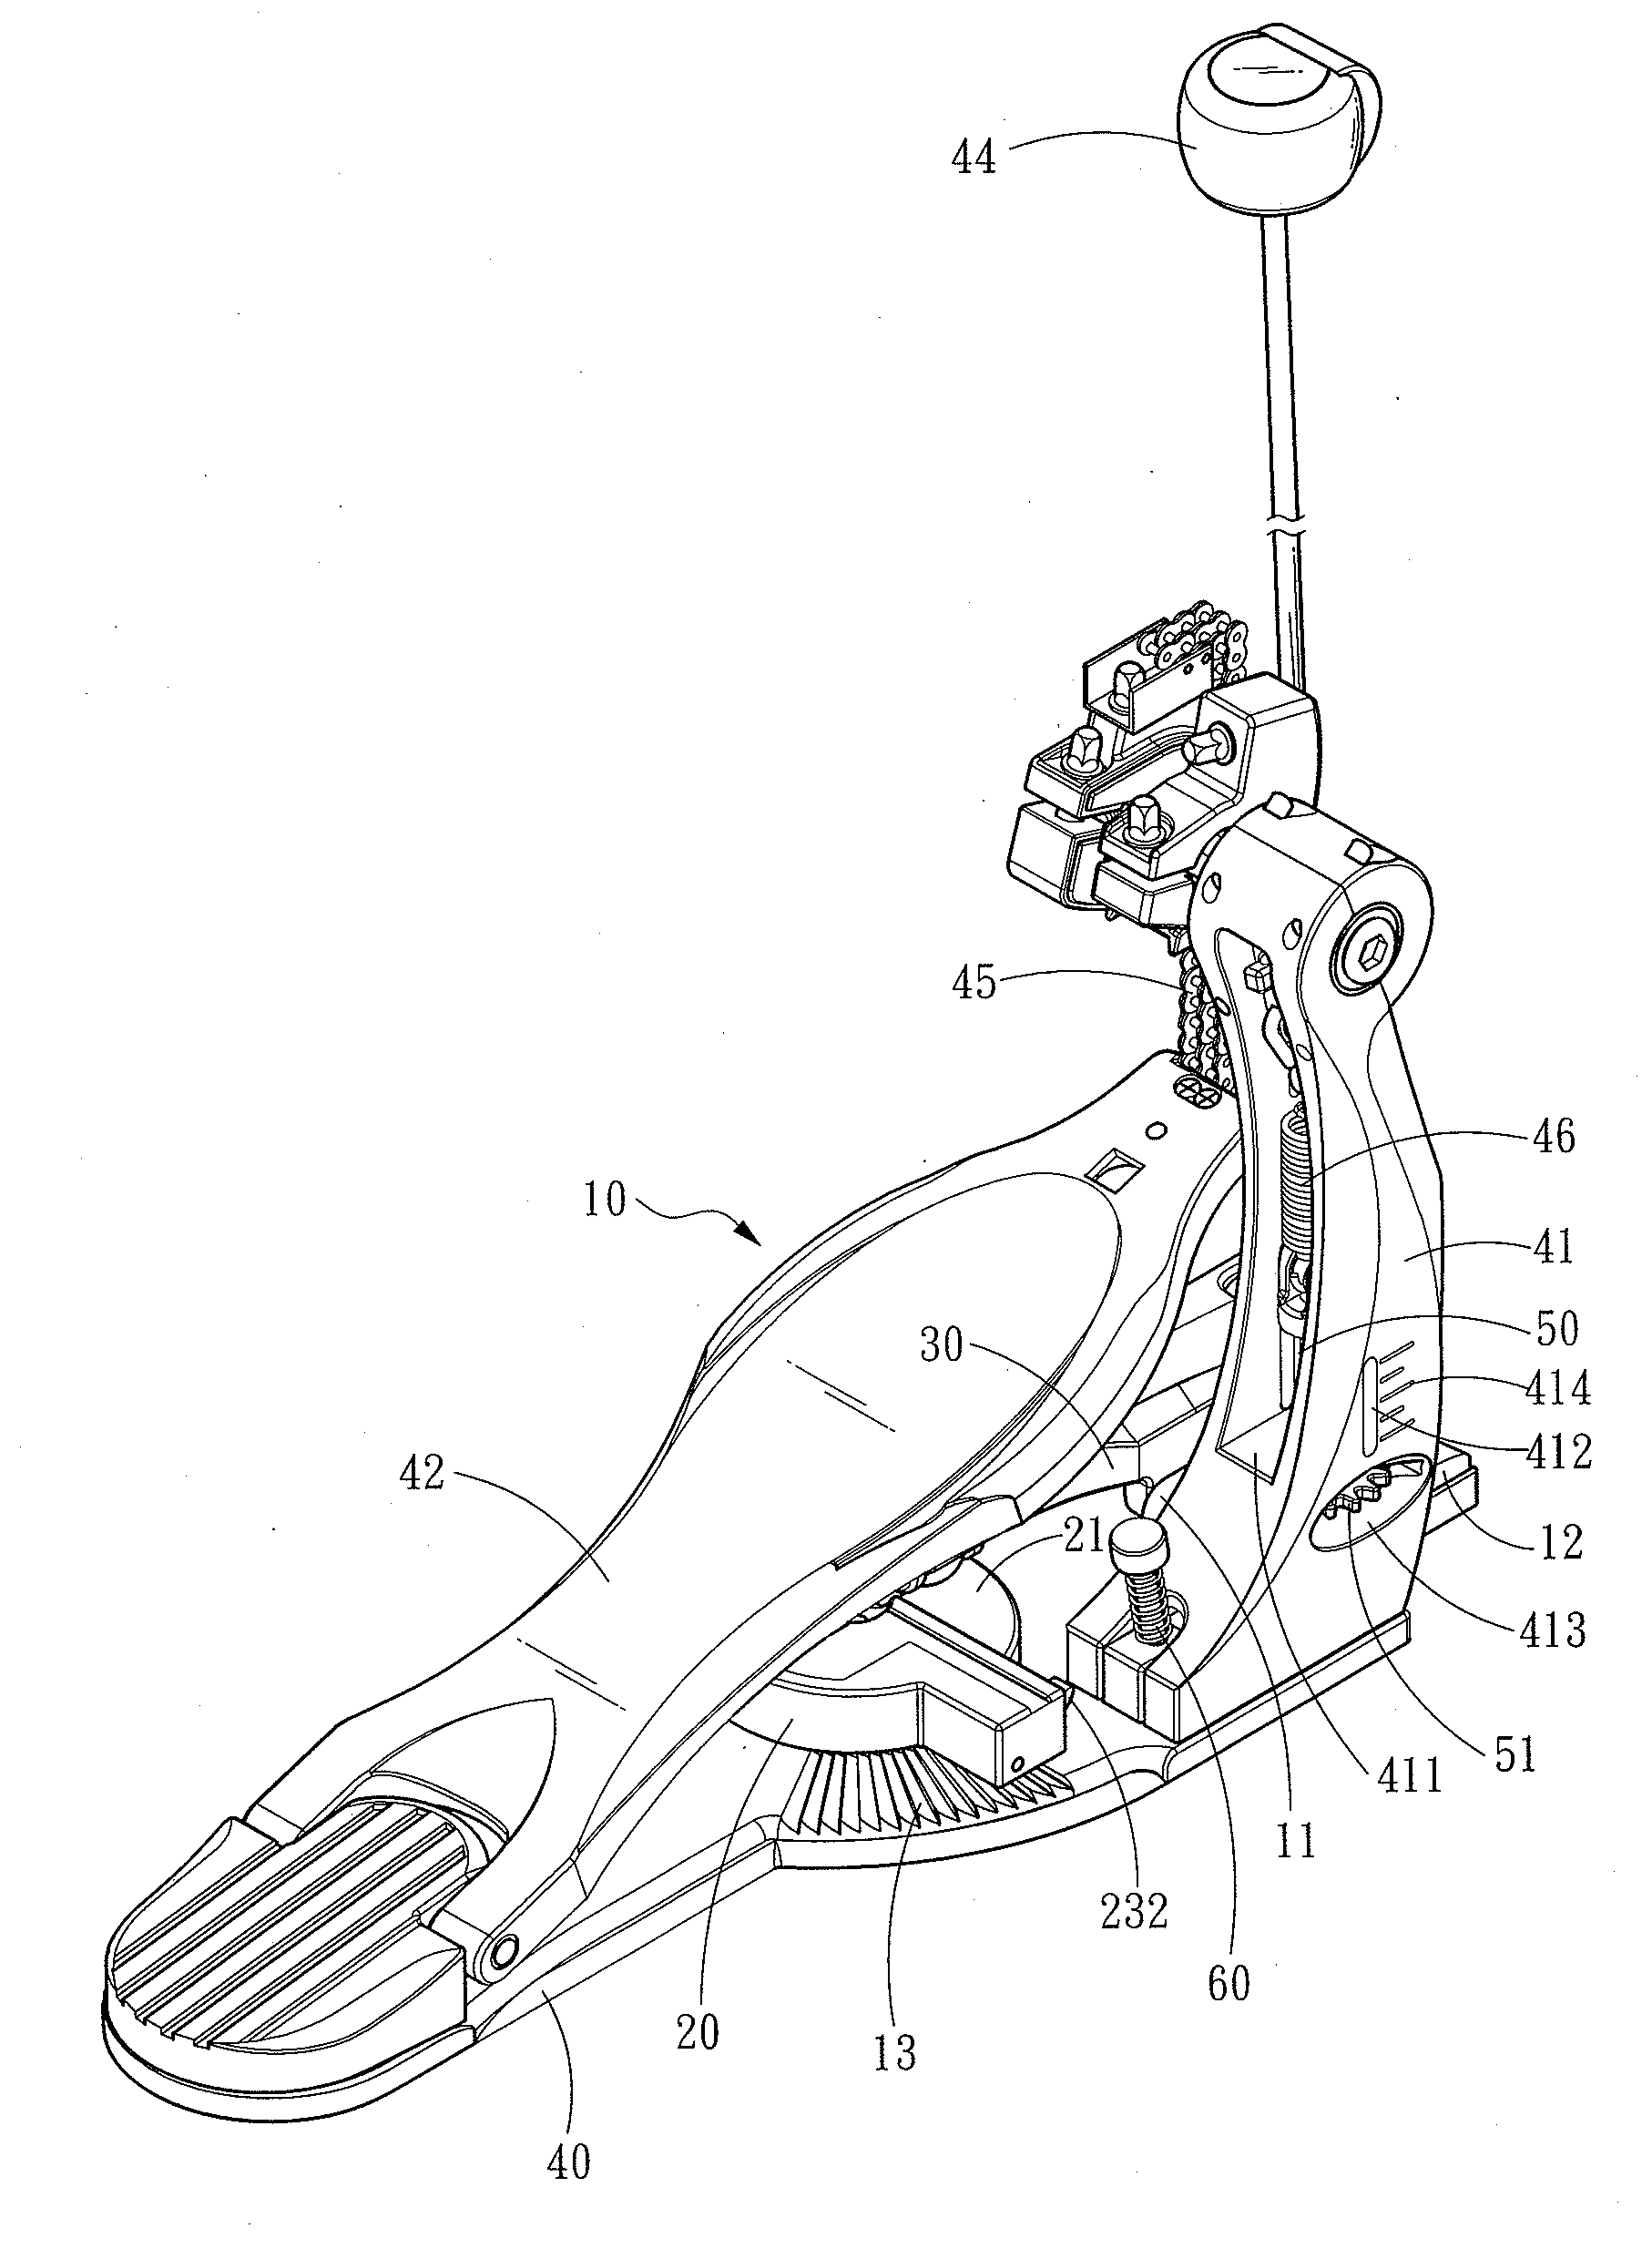 Pedal beating apparatus for musical instruments